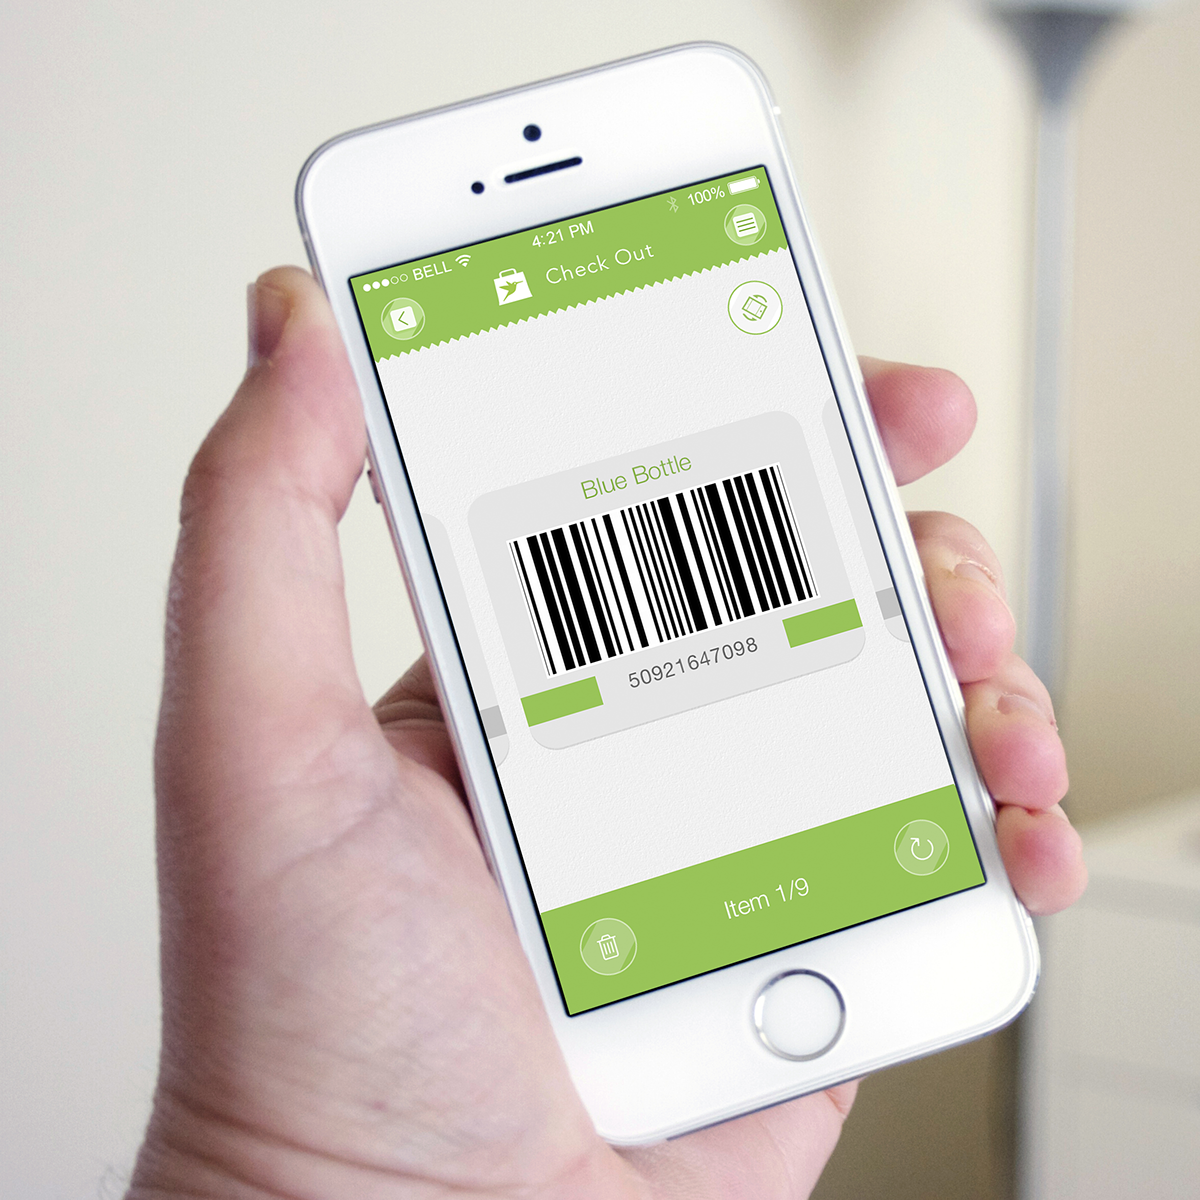 shopping app Two Sided lists Barcode Scanning app quick checkout Easy Checkout to do list shopping list Deals App Loyalty Cards app Scan to list